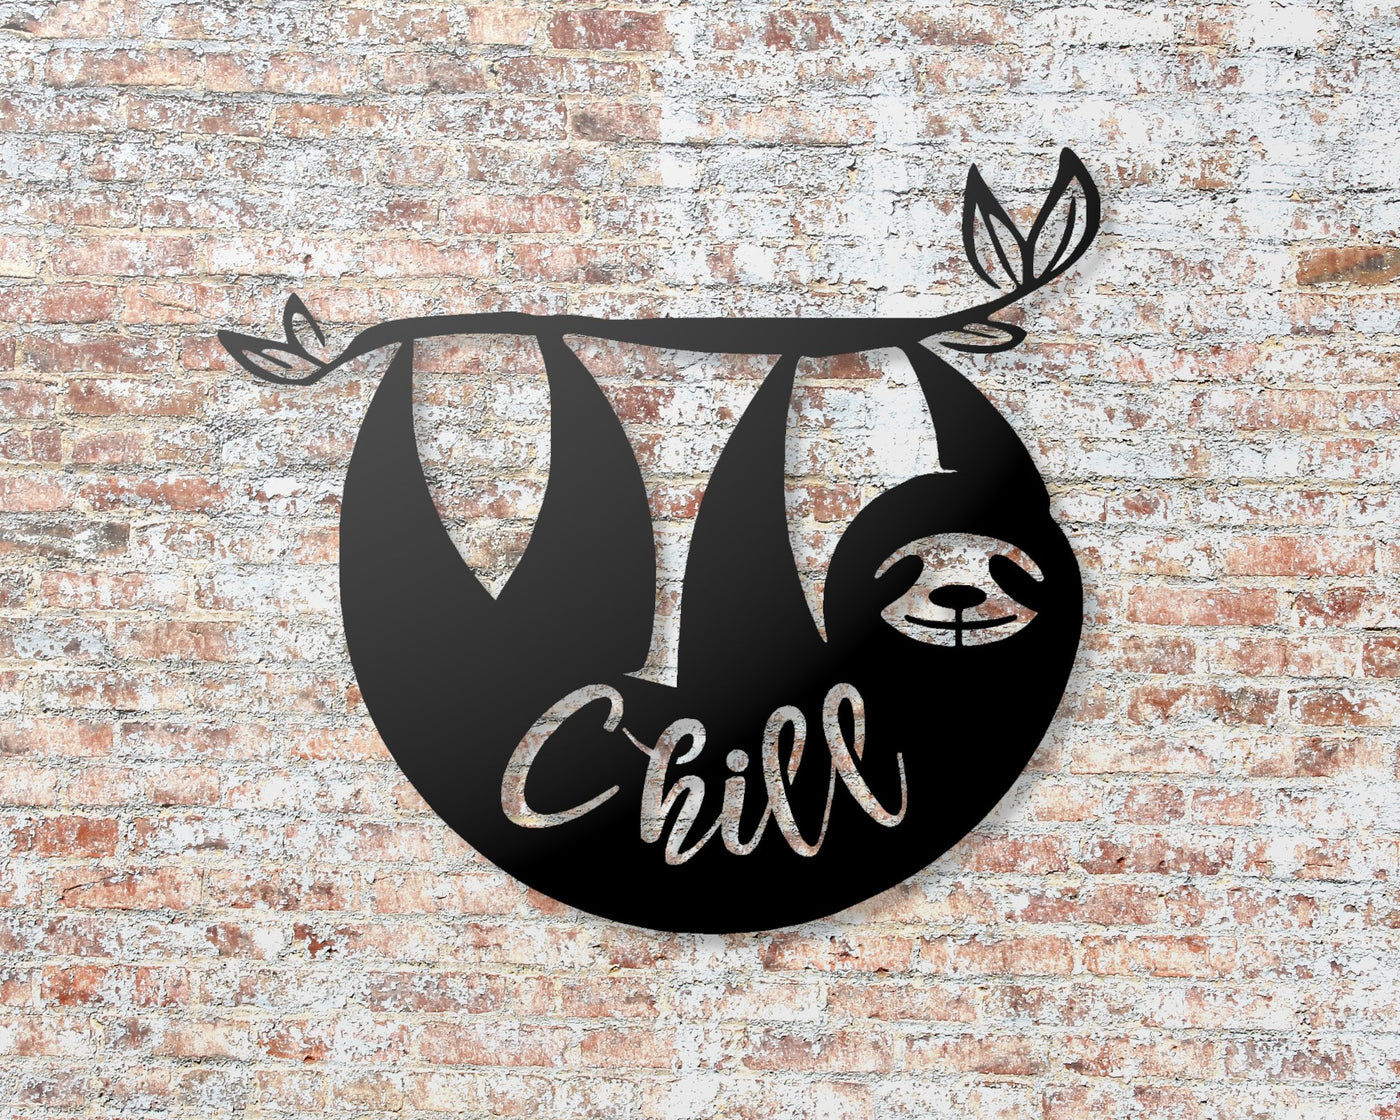 Sloth Chill Sign, Metal Word Sign - Madison Iron and Wood - Metal Word Art - metal outdoor decor - Steel deocrations - american made products - veteran owned business products - fencing decorations - fencing supplies - custom wall decorations - personalized wall signs - steel - decorative post caps - steel post caps - metal post caps - brackets - structural brackets - home improvement - easter - easter decorations - easter gift - easter yard decor